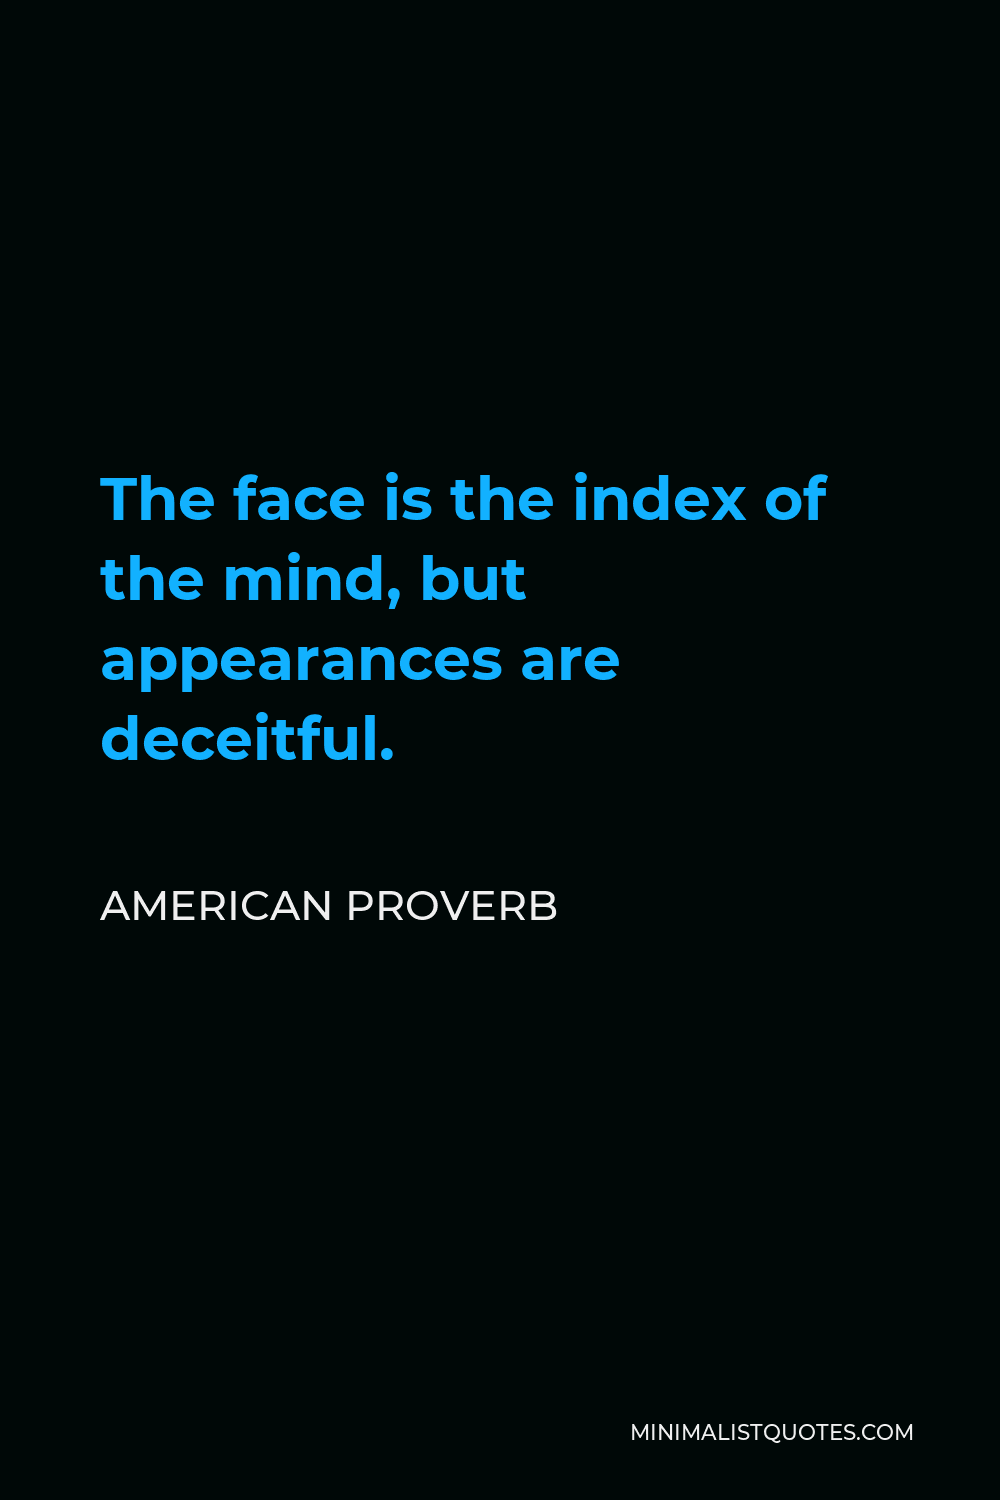 American Proverb Quote - The face is the index of the mind, but appearances are deceitful.